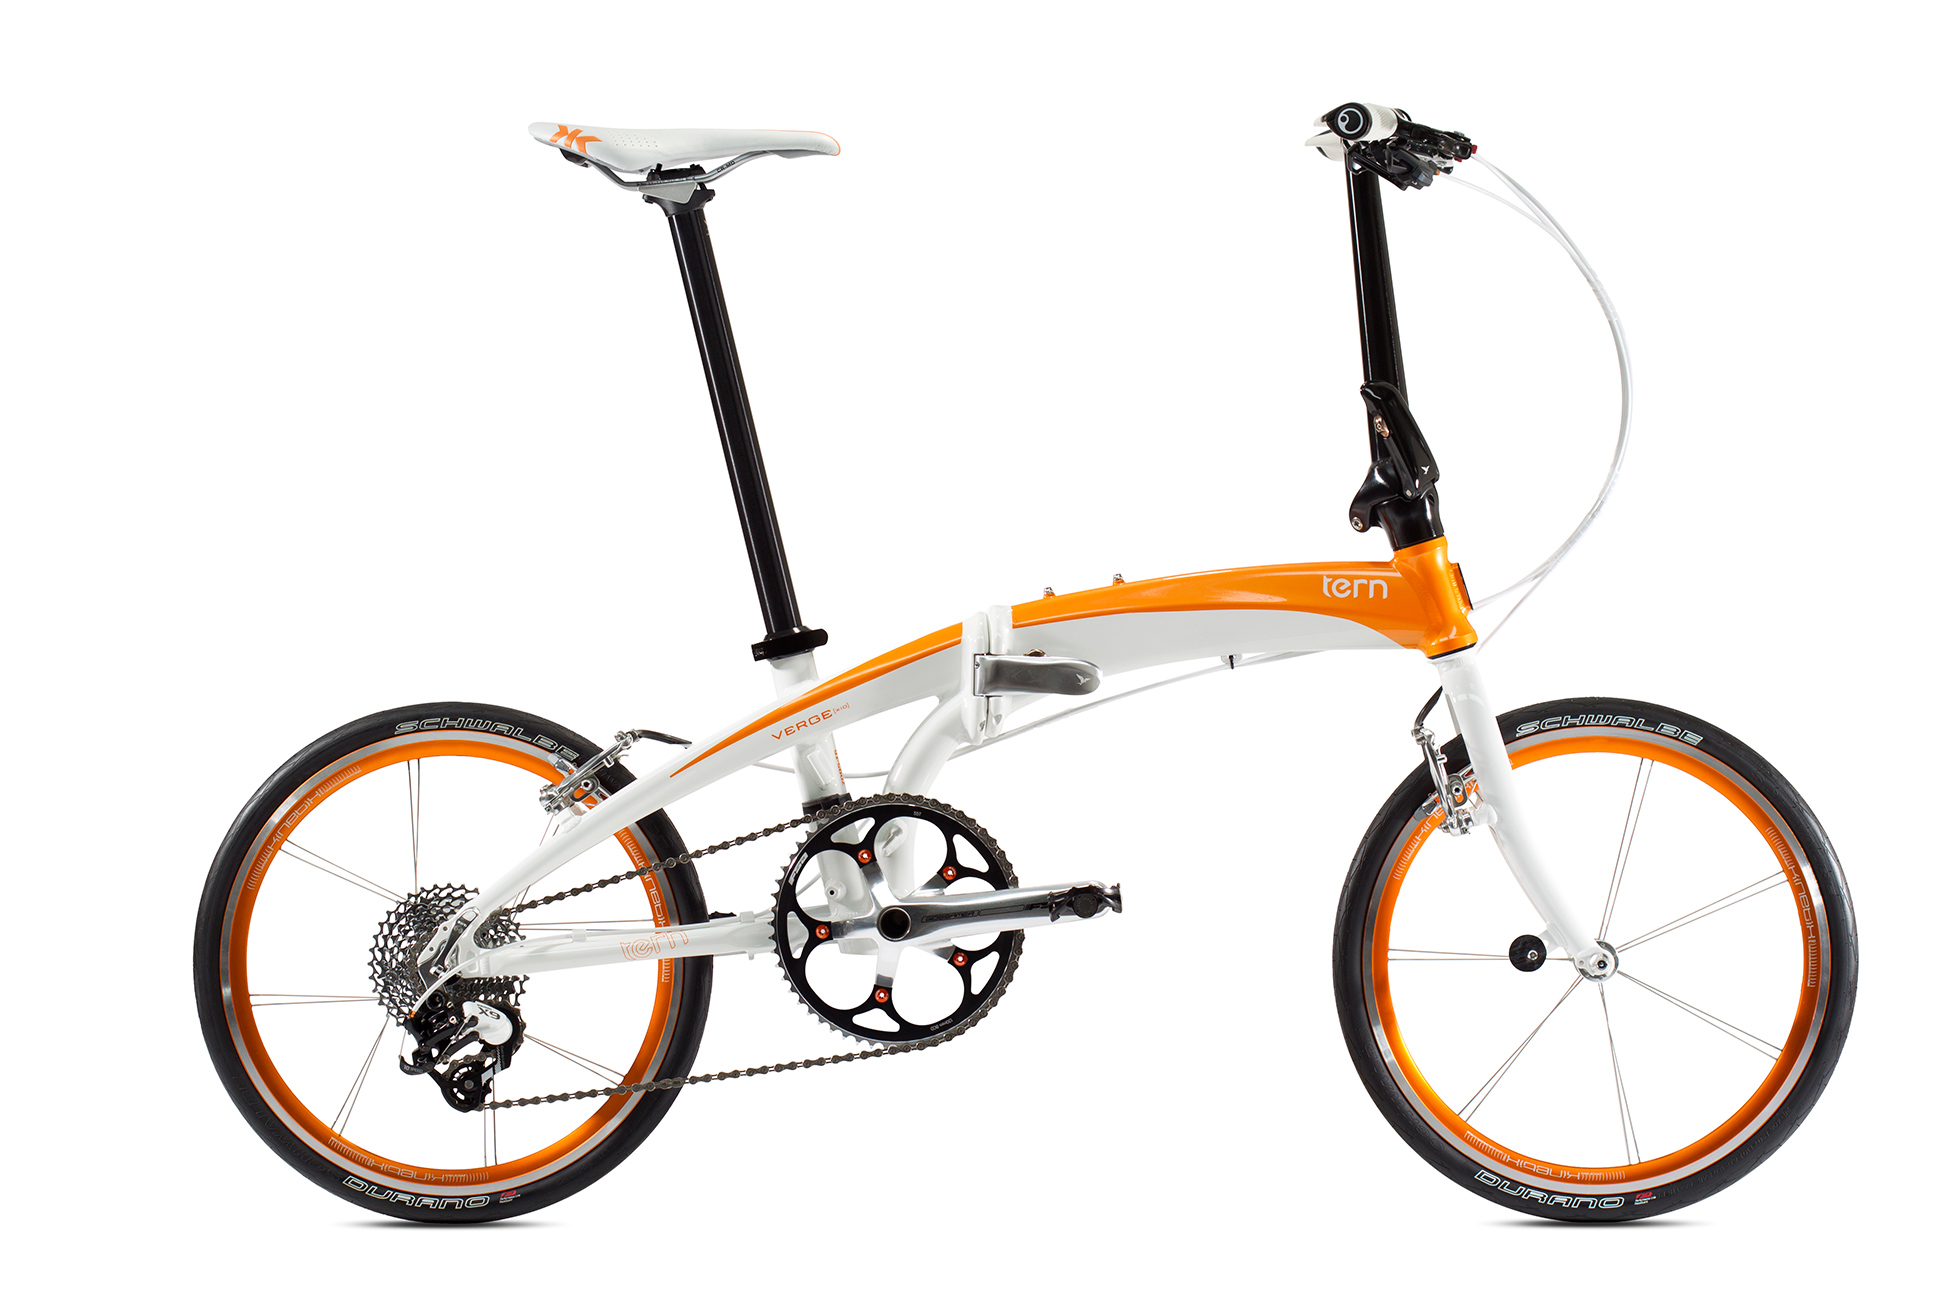 Verge X10: Our Top Folding Bike, Built For Speed